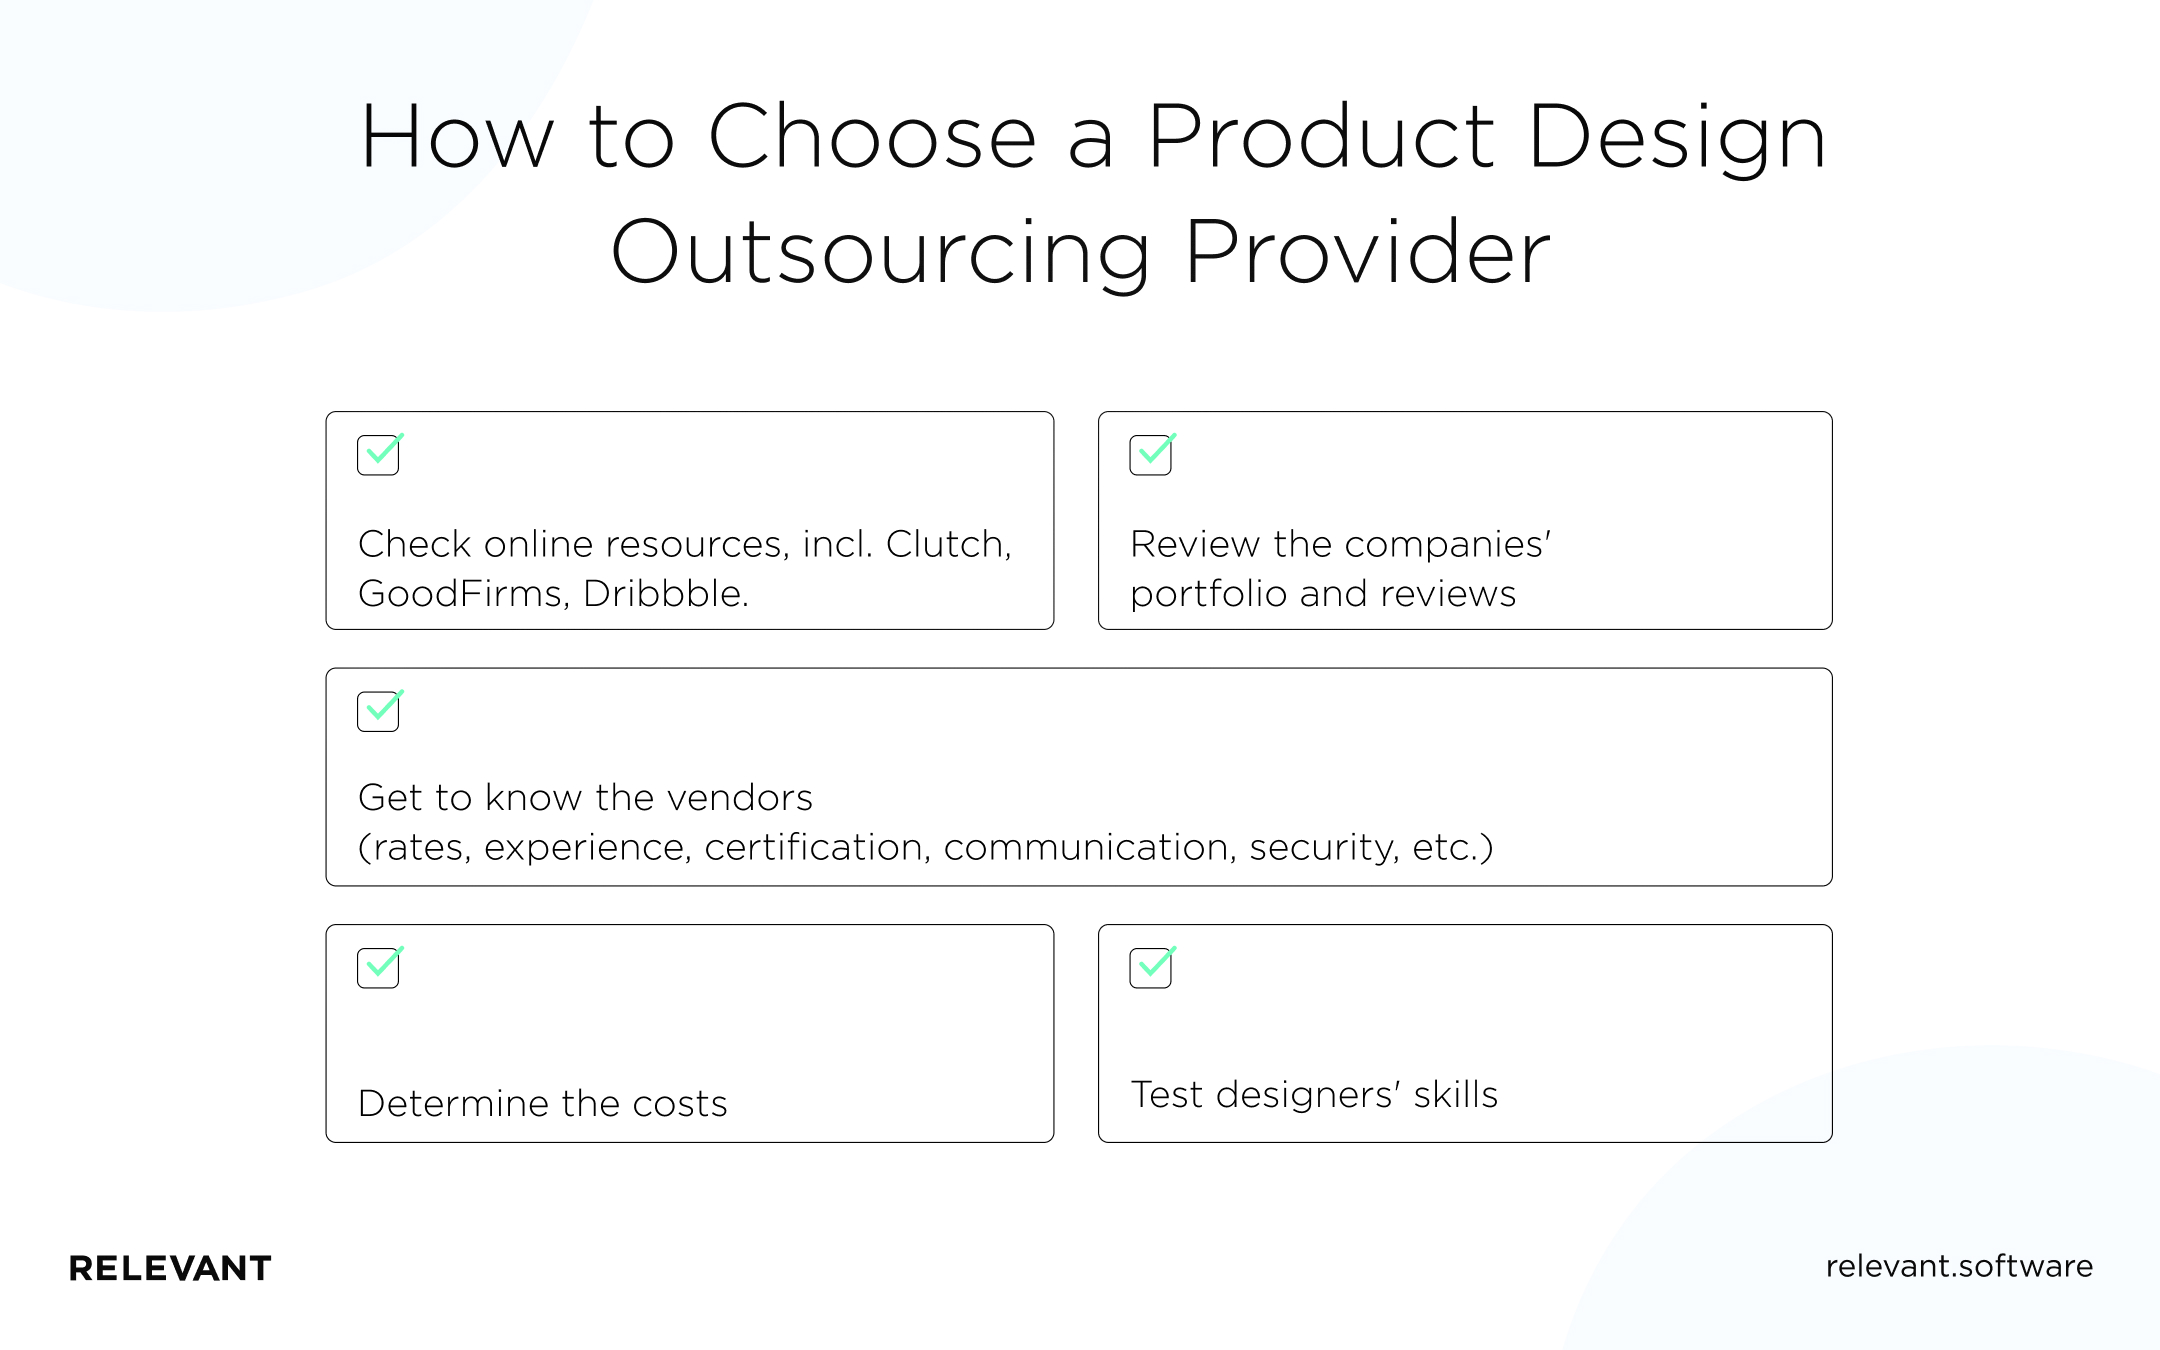 How to Choose a Product Design Outsourcing Provider